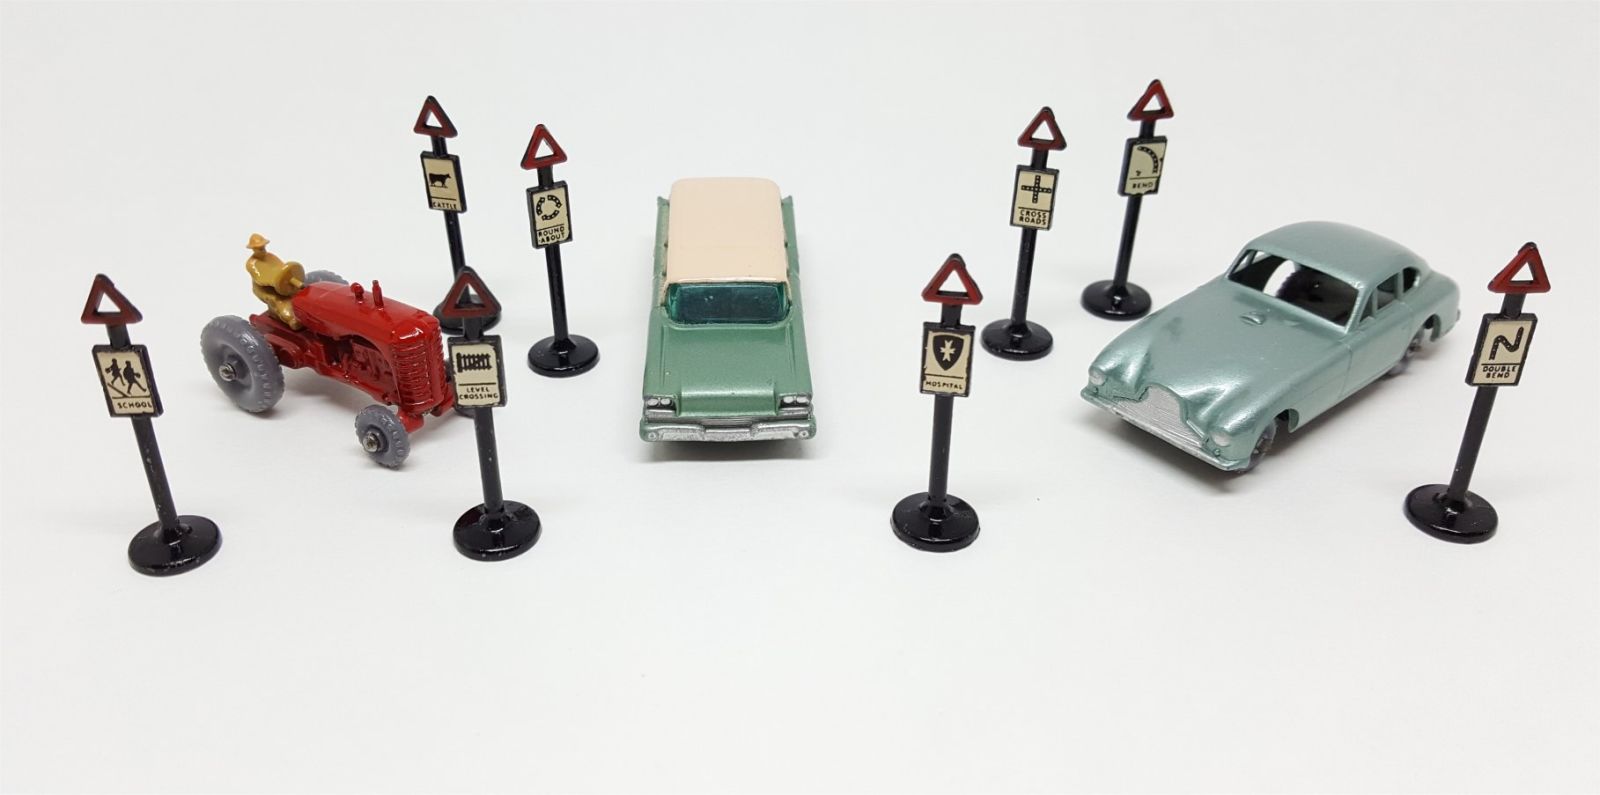 Illustration for article titled Surprise Saturday - Lesney Matchbox Road Signs Accessory Pack